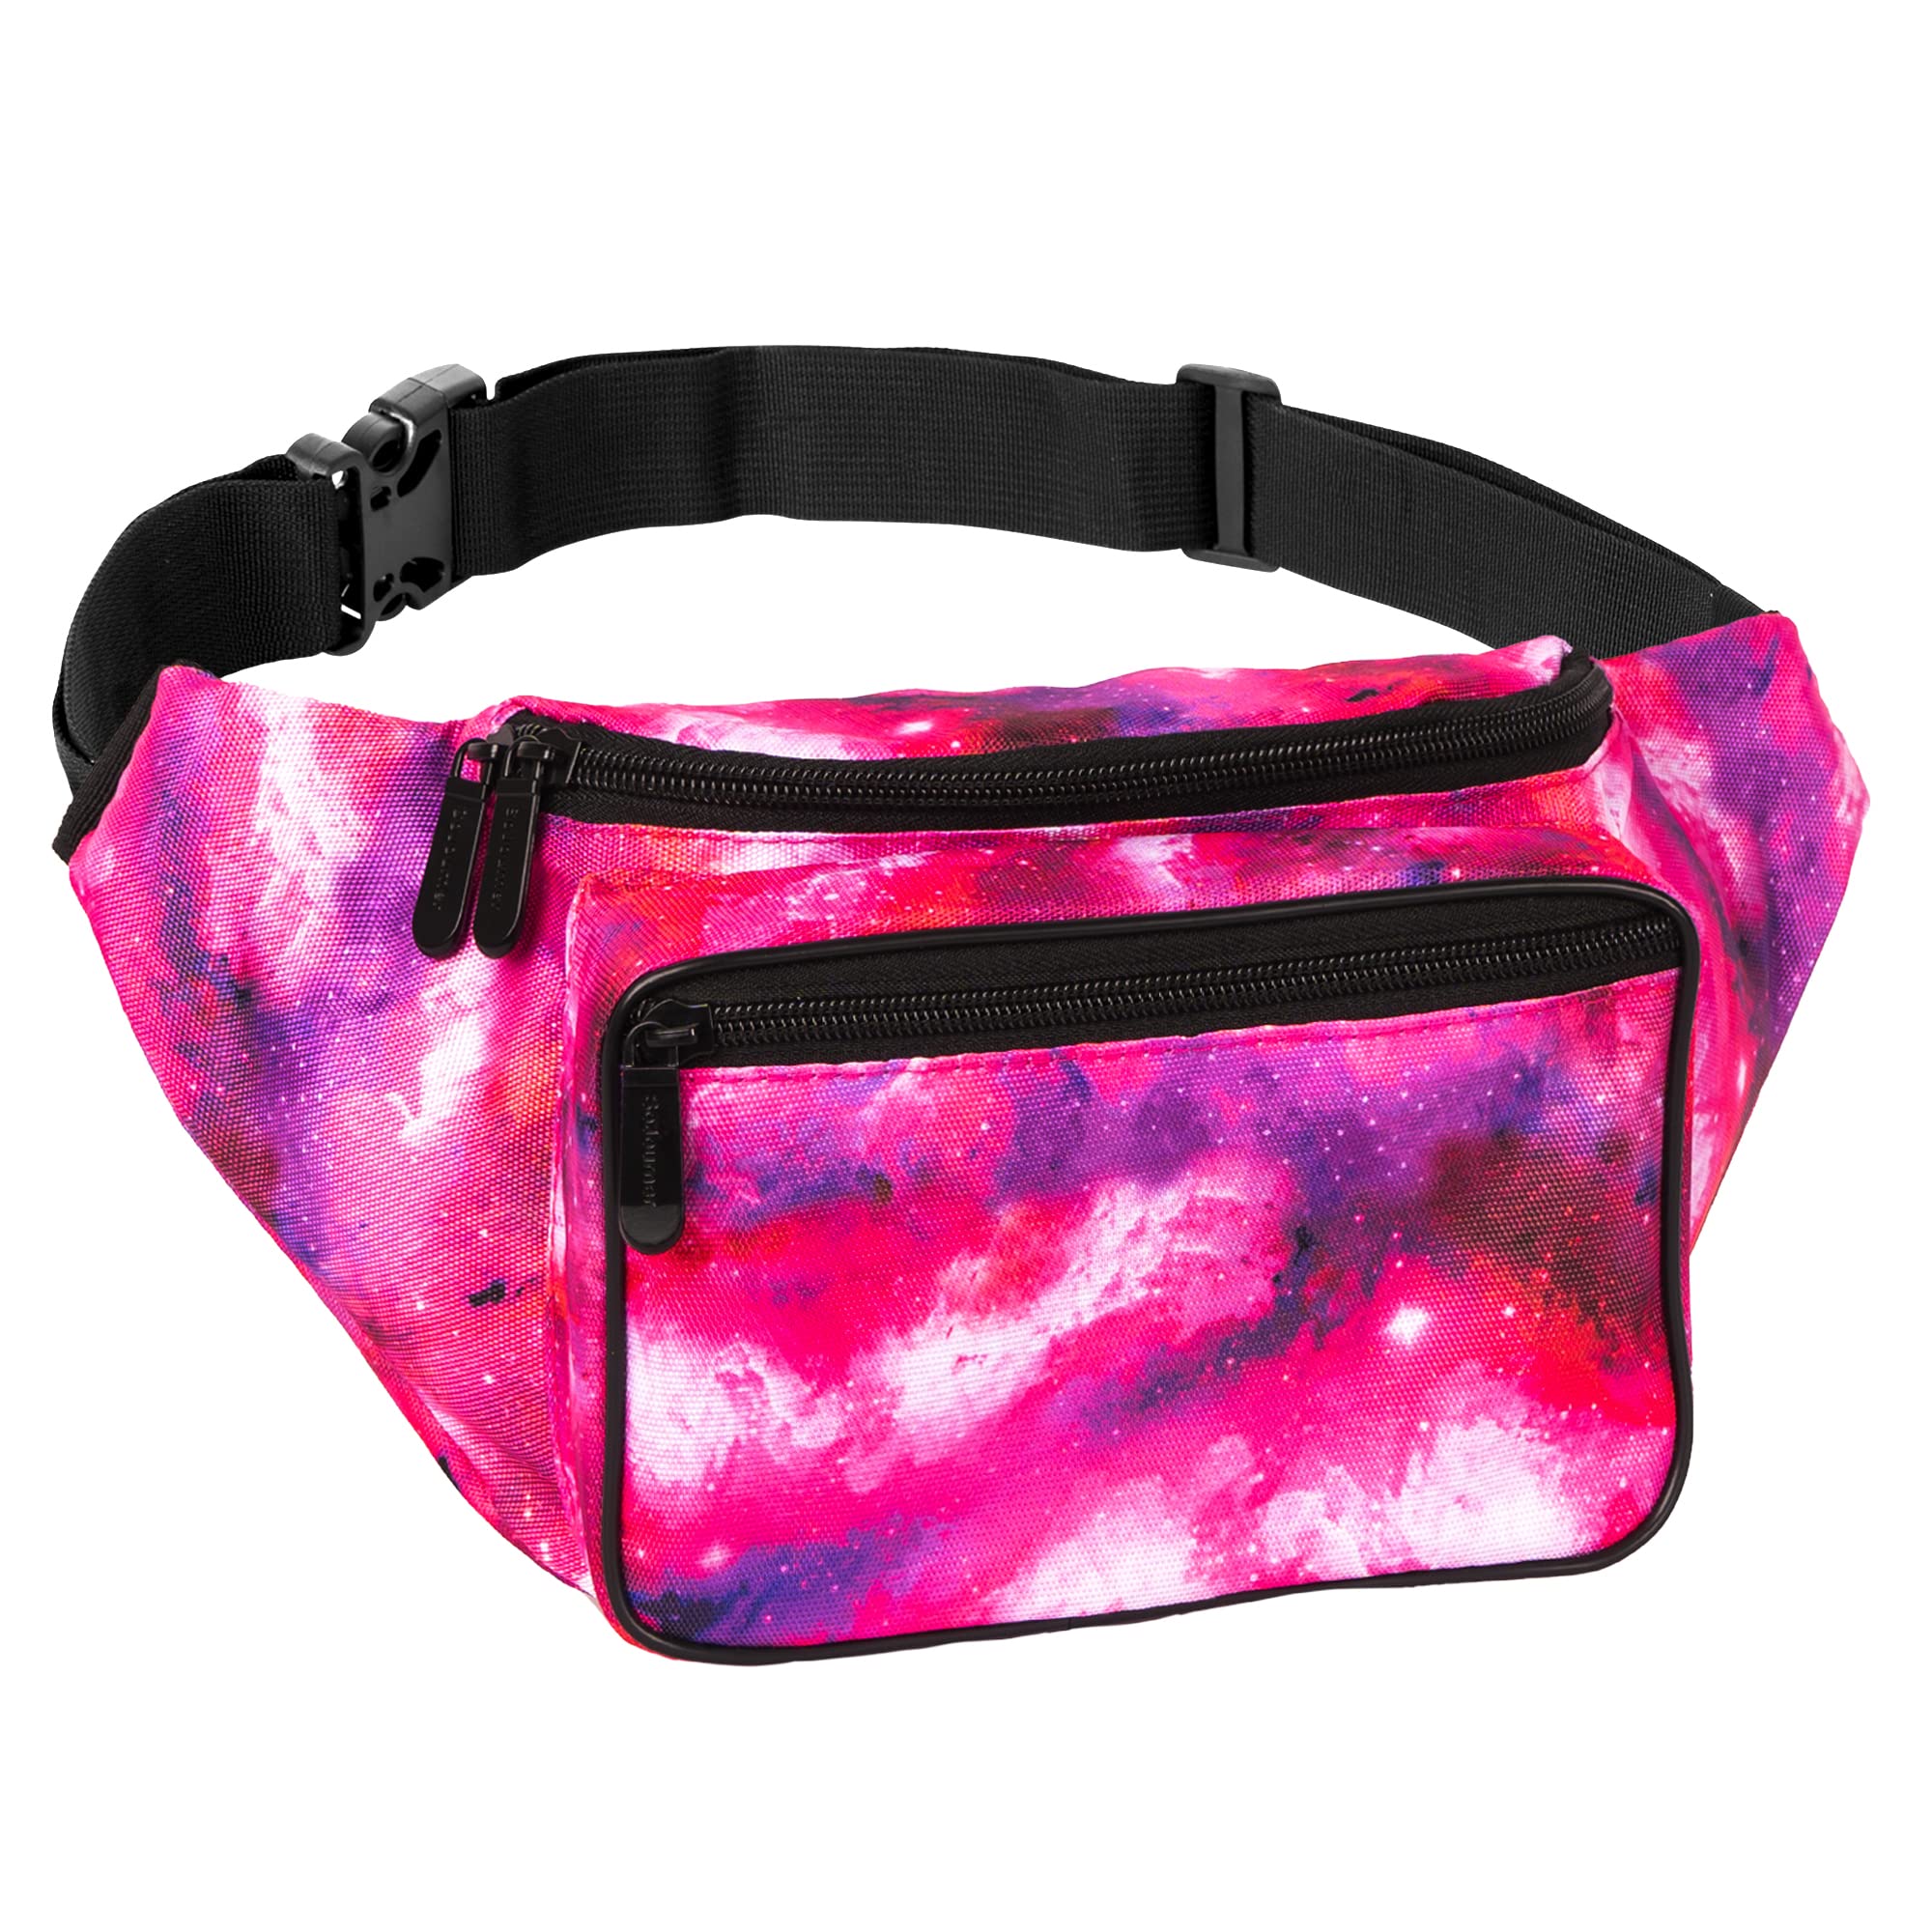 Fanny Pack Belt Bag I Mens Fanny Packs for Women - Crossbody Bag Bum bag Waist Bag Waist Pack -For Halloween costumes, for Hiking, Running, Travel, Waterproof and more (Galaxy Pink & Purple)